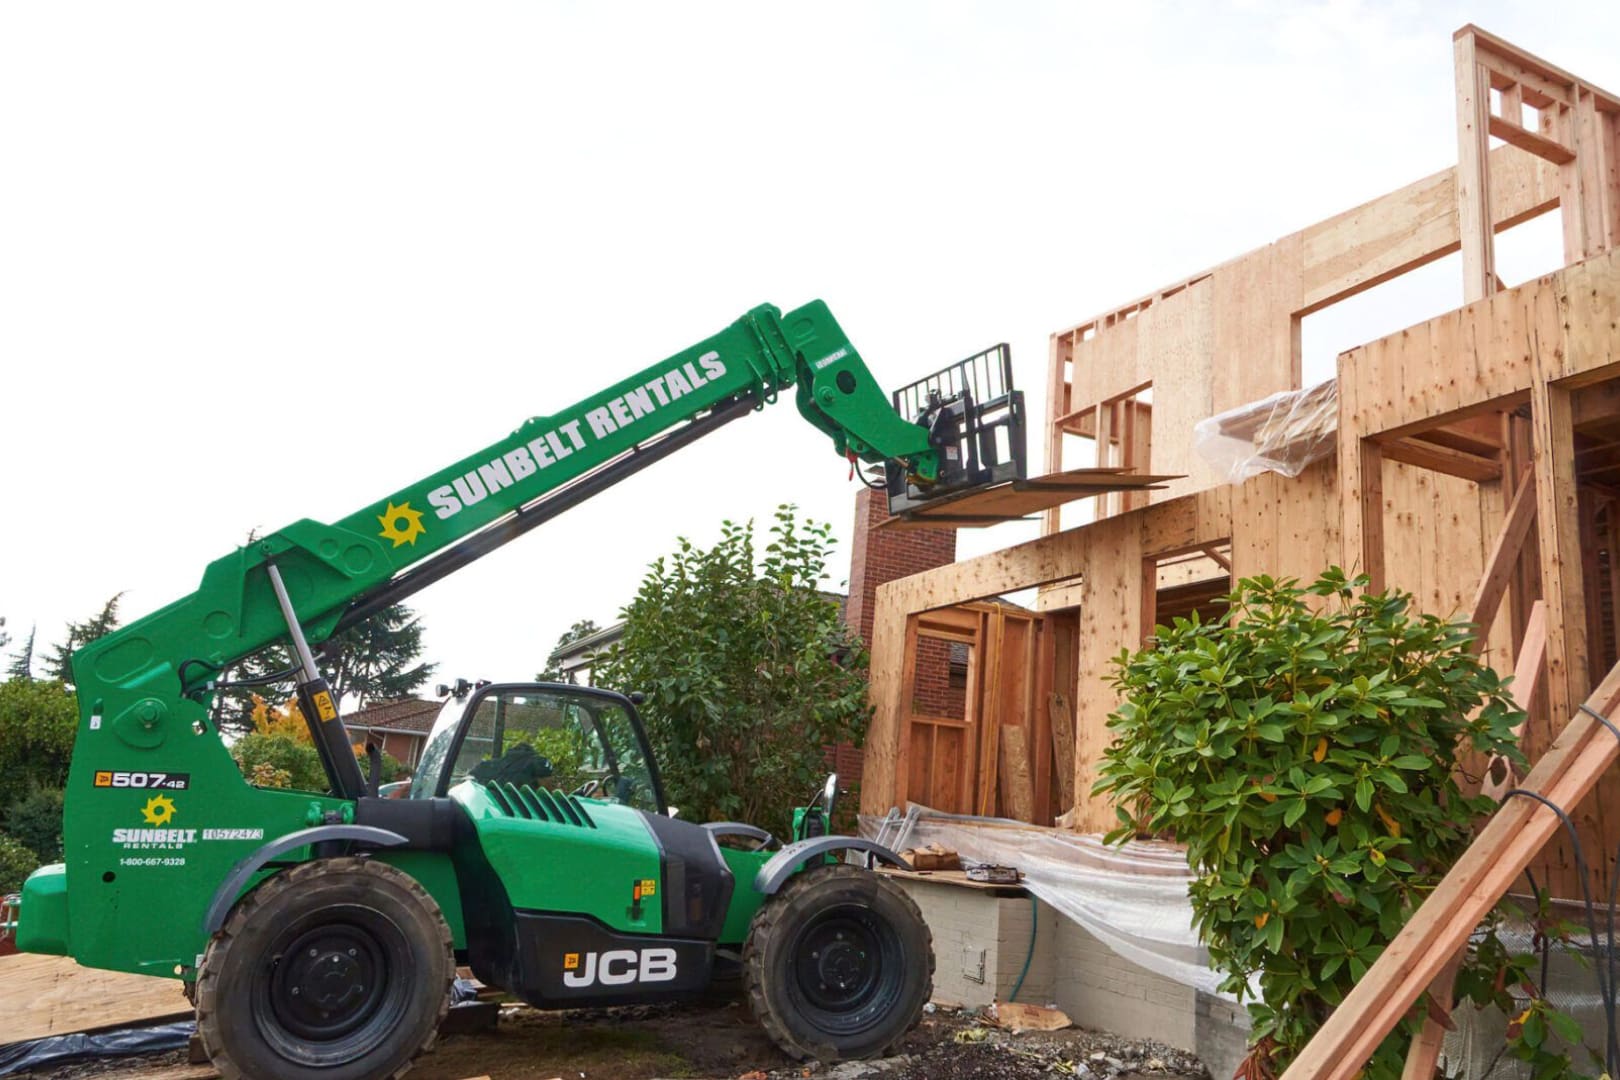 A green crane is in front of a building.